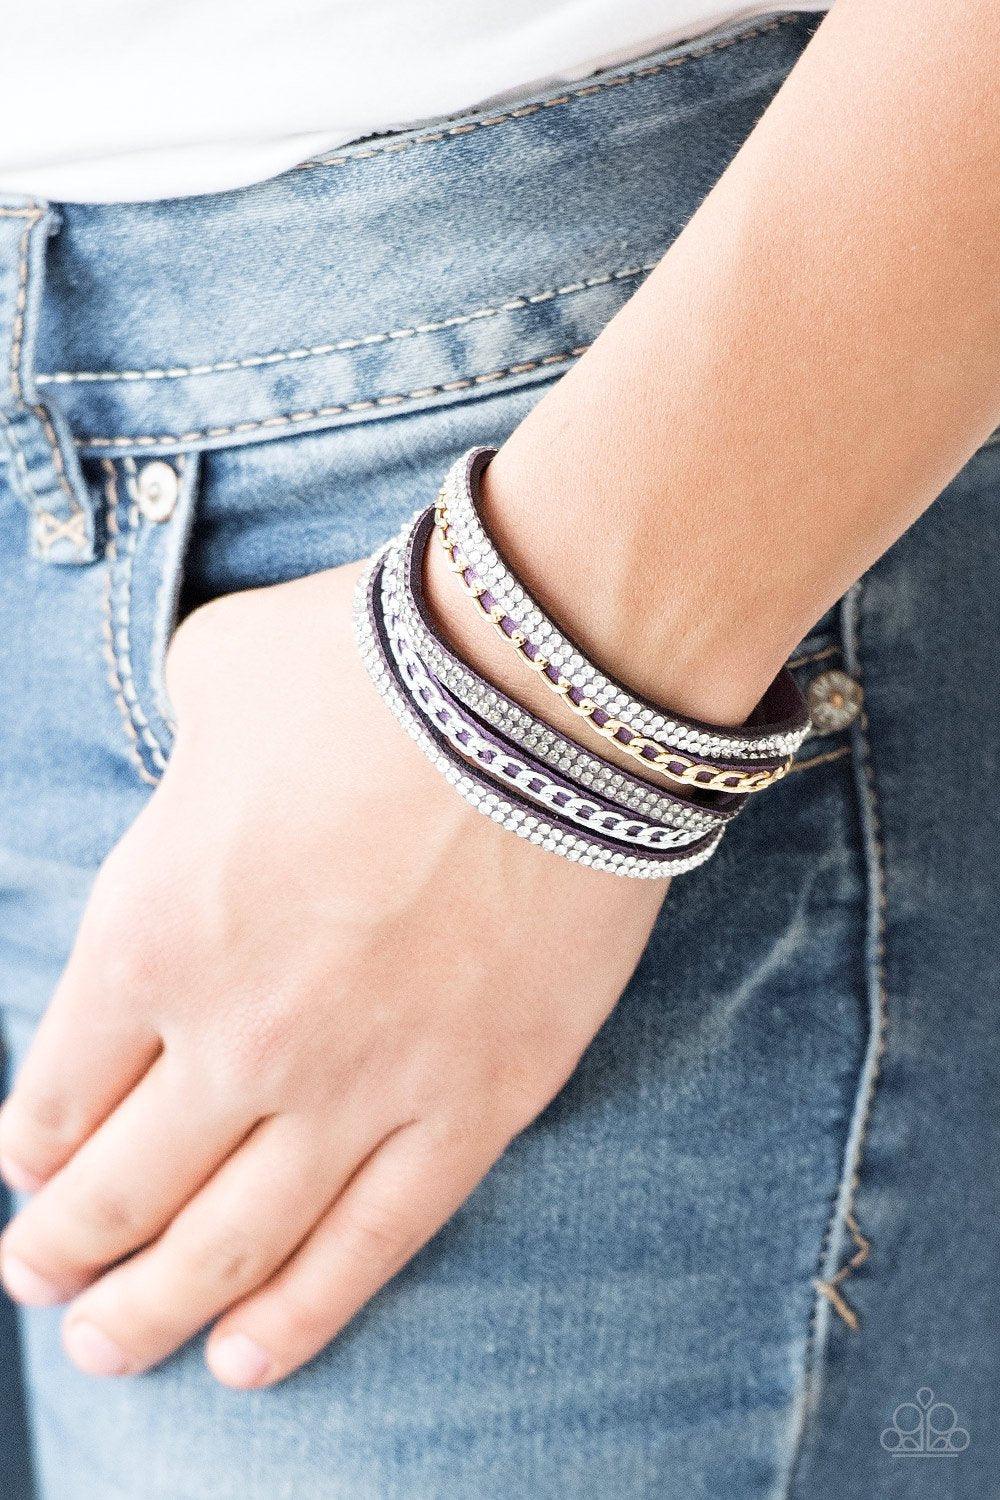 Paparazzi Accessories Fashion Fiend - Purple Glassy white and smoky rhinestones are encrusted along strands of purple suede. Glistening silver and gold chains are added to the bands, adding edgy industrial shimmer to the sassy palette. Features an adjusta